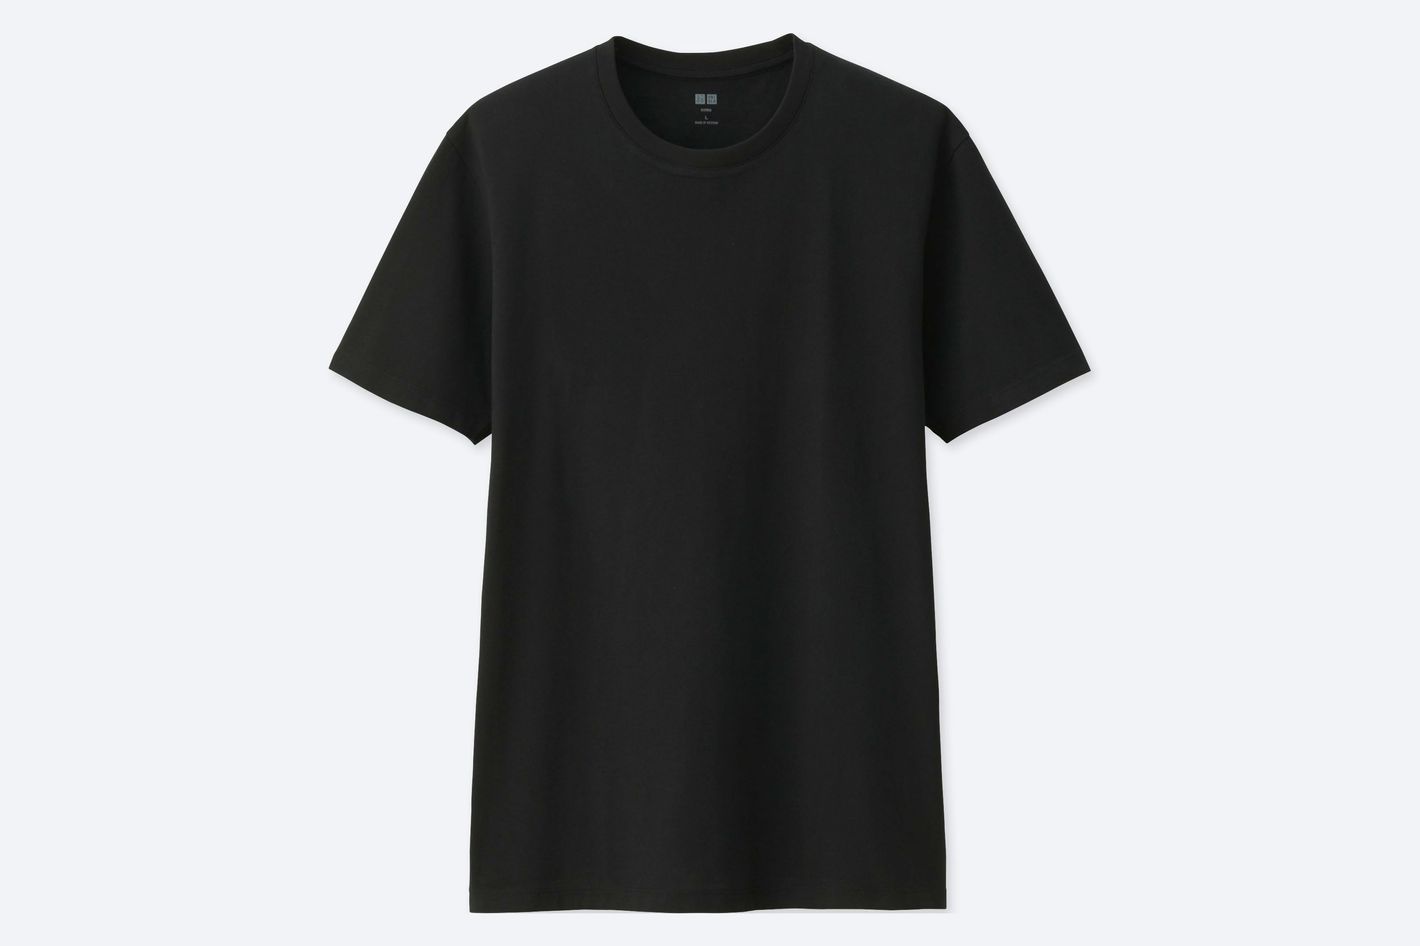 12 Very Best Black T-Shirts for Men